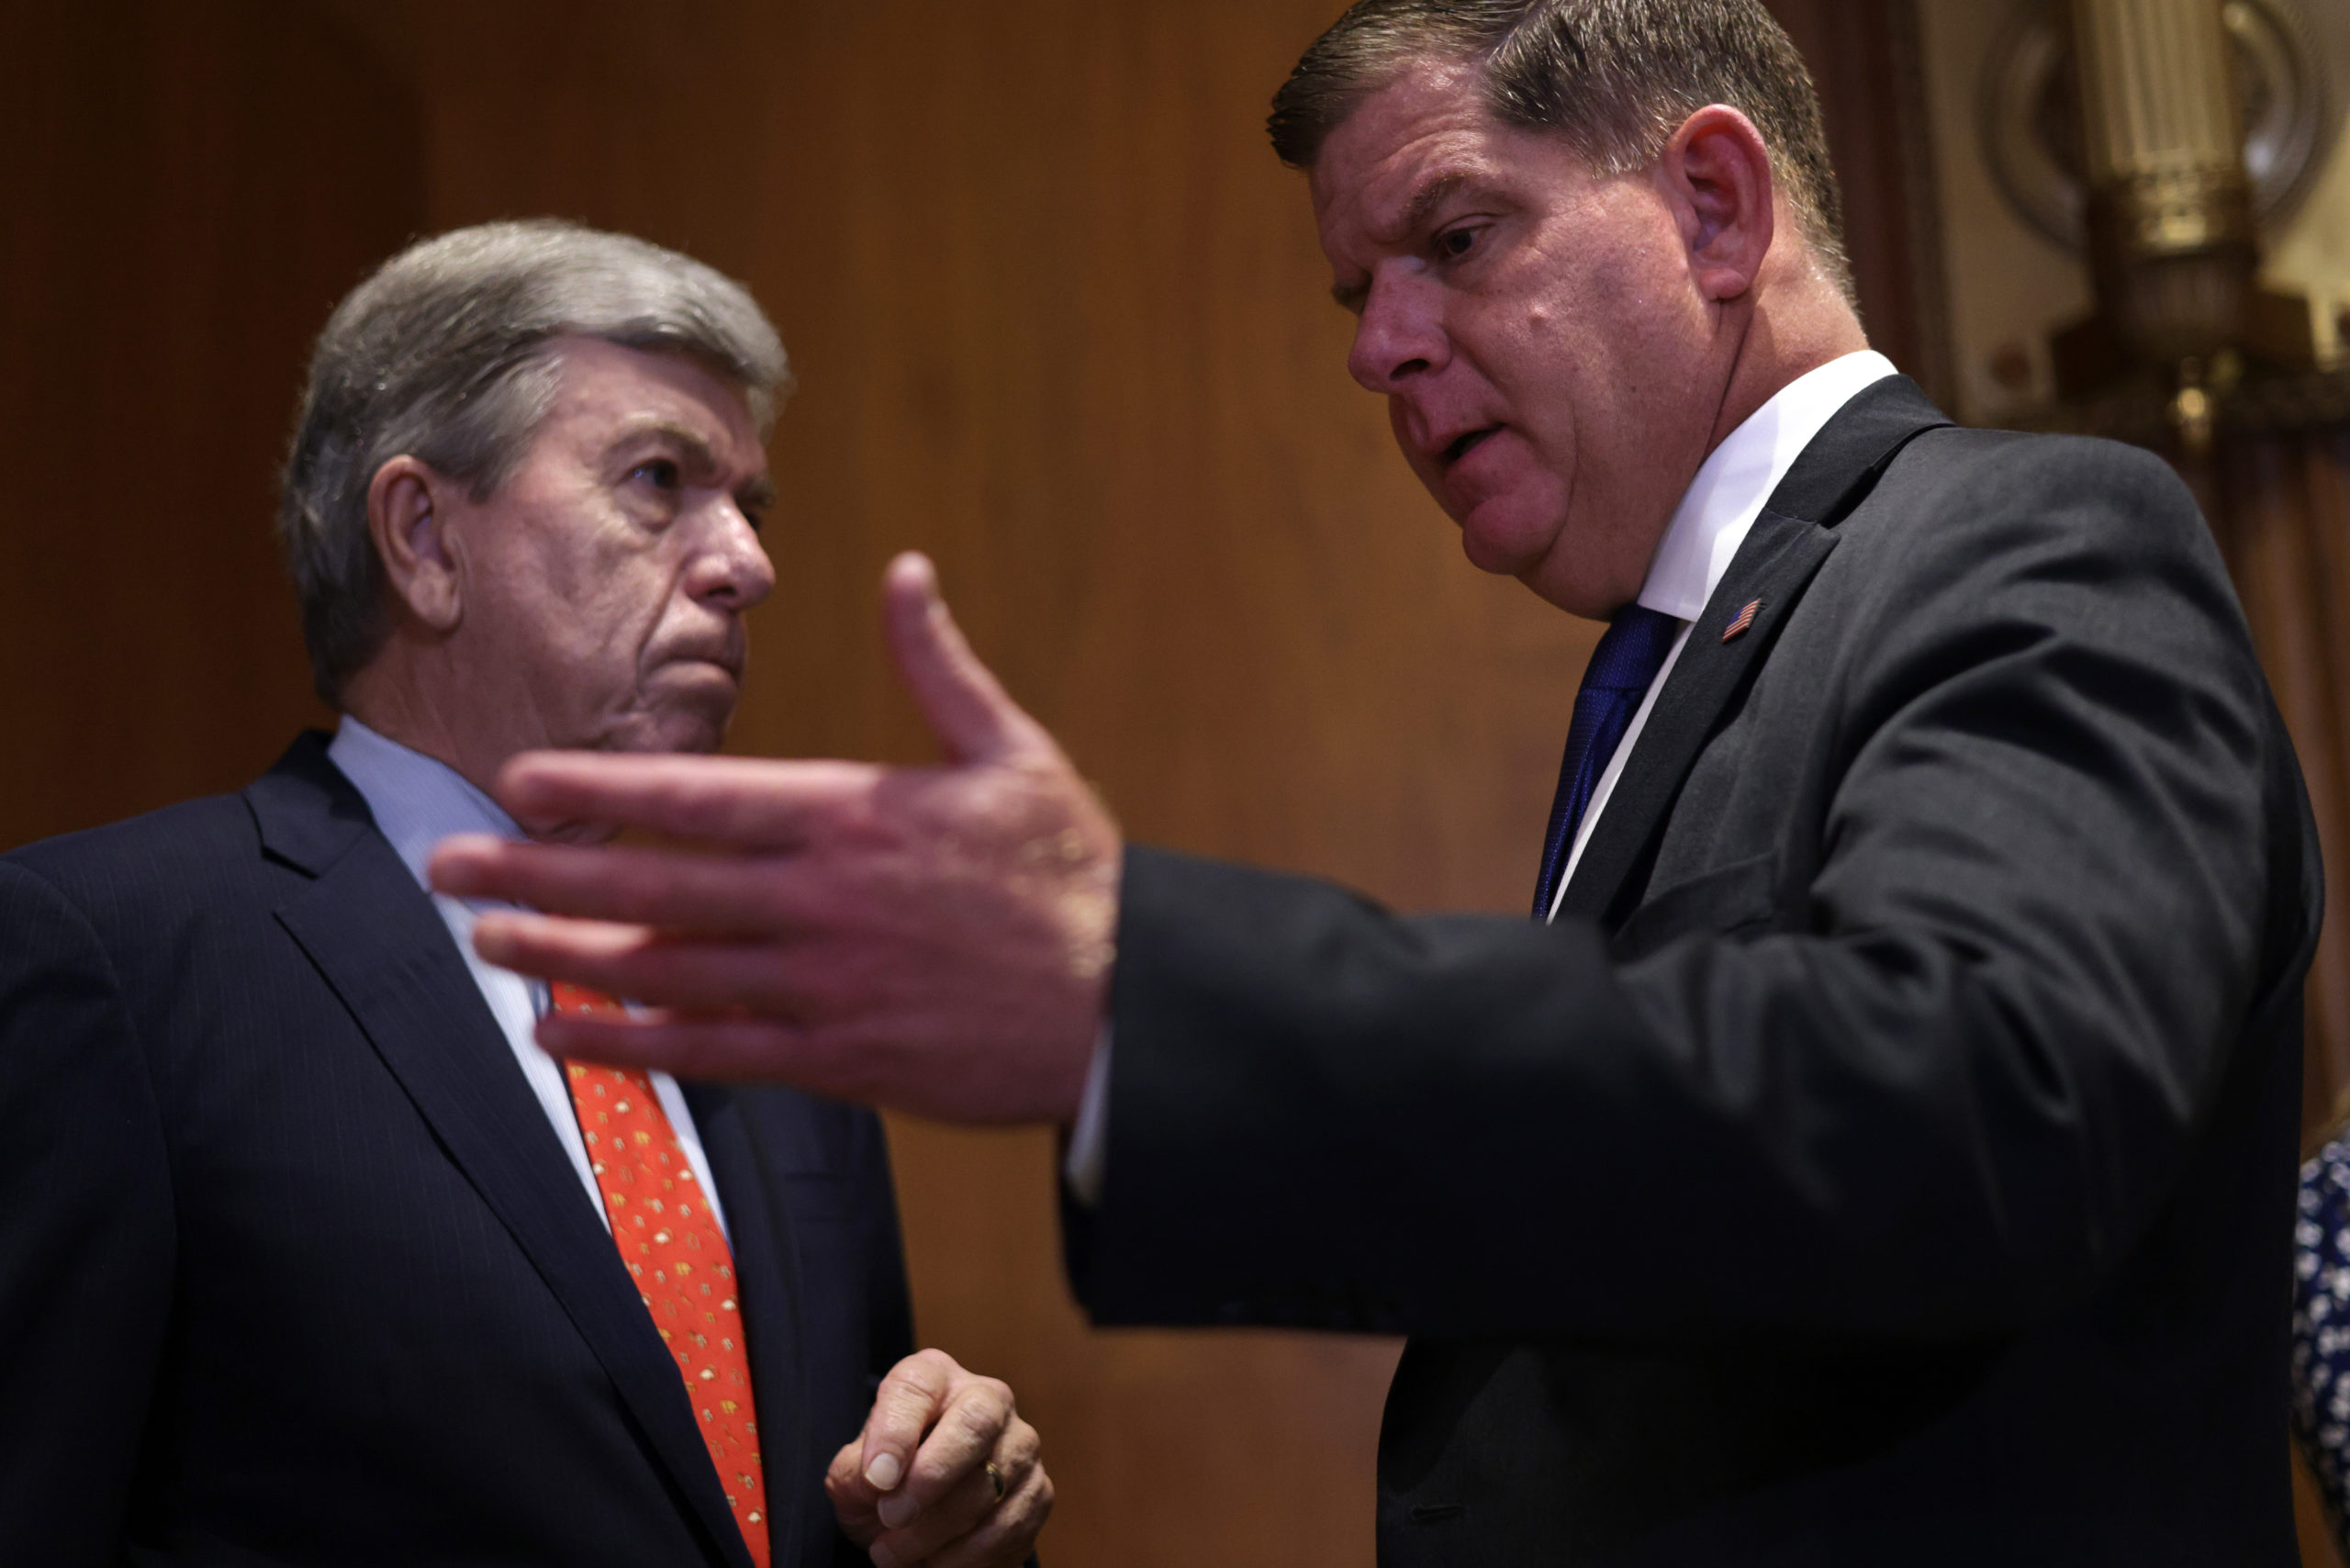 Secretary of Labor Marty Walsh talks to Republican Sen. Roy Blunt following a hearing on July 14. (Alex Wong/Getty Images)